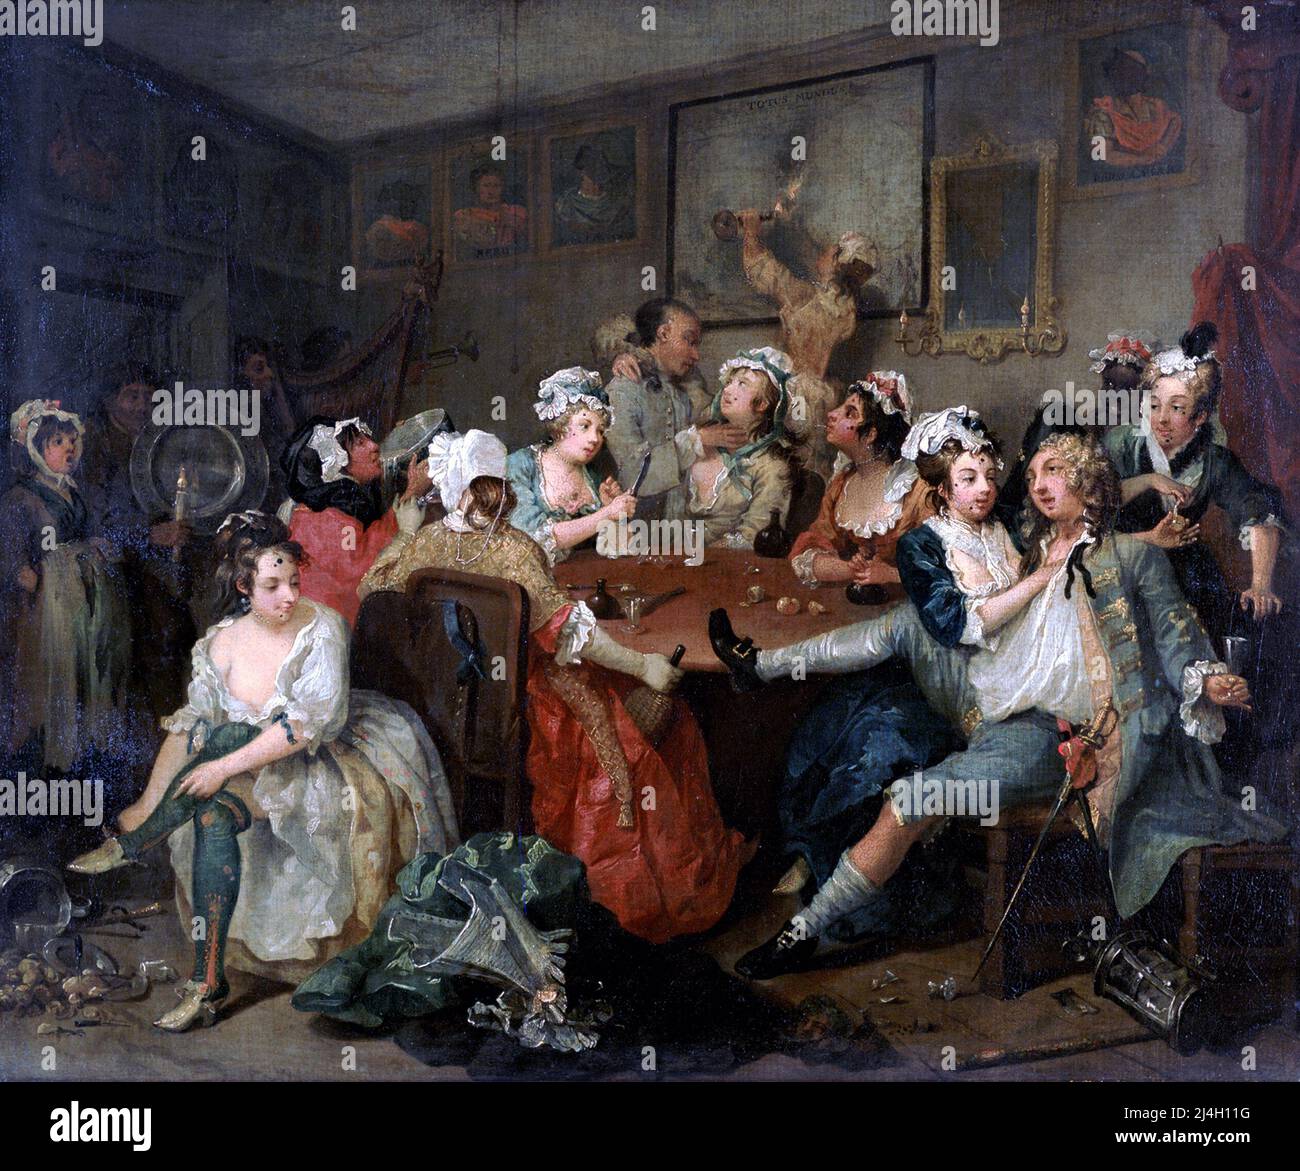 The Orgy, Painting by William Hogarth Stock Photo